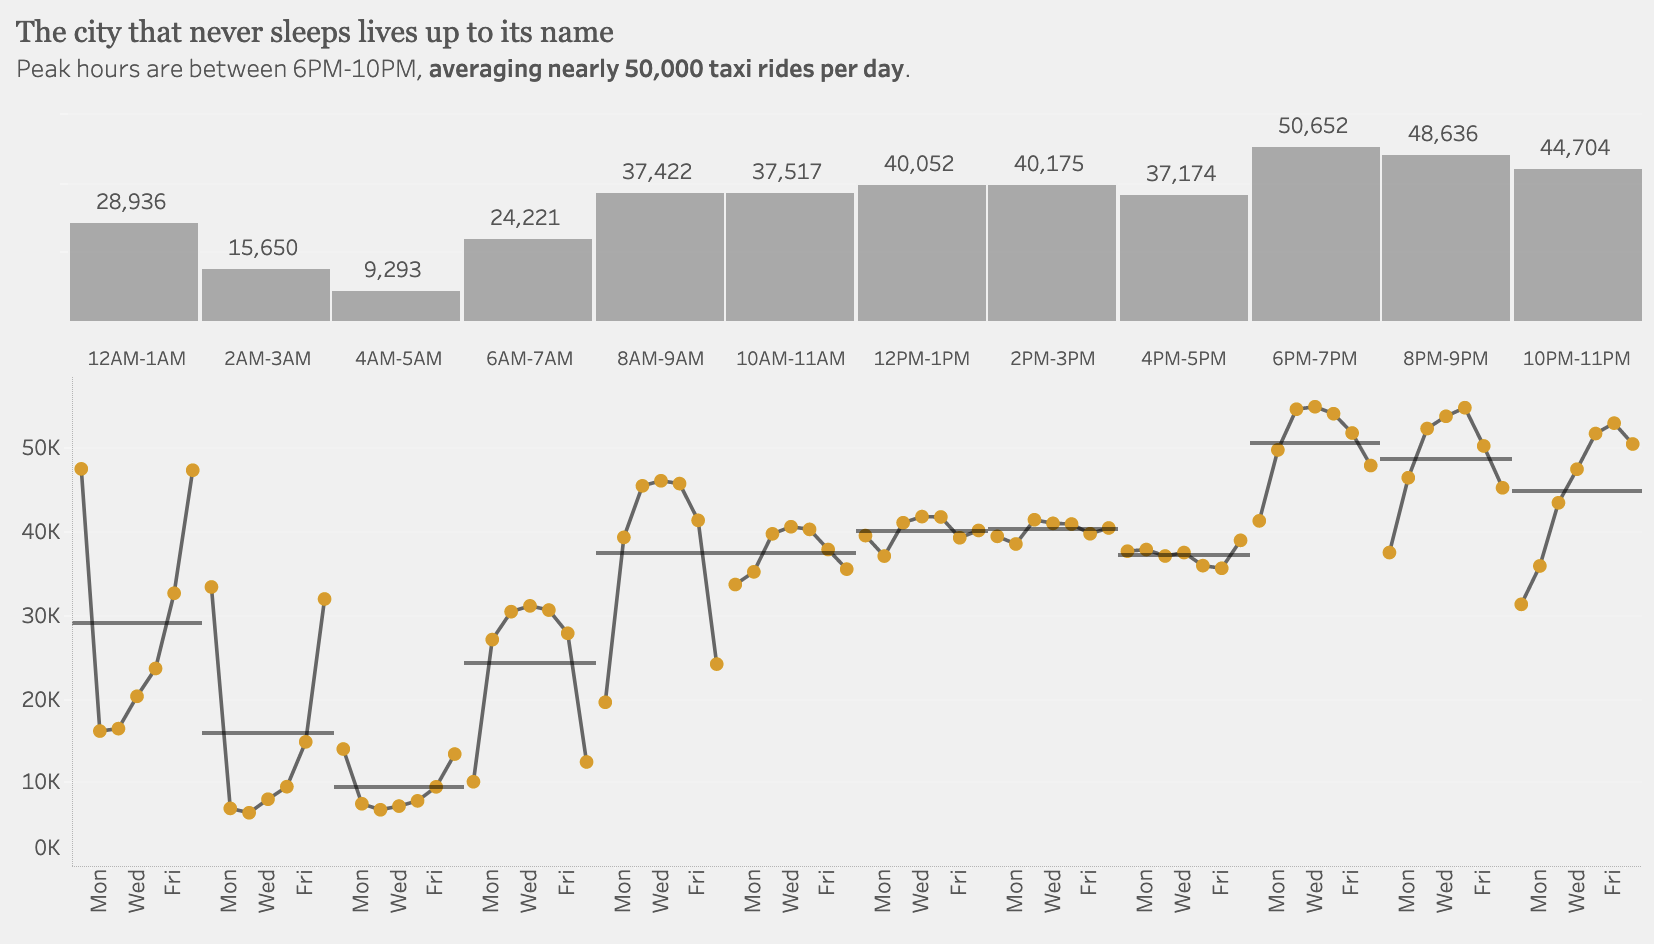 A cycle plot titled 'The city that never sleeps lives up to its name', showing hourly taxi rides per day